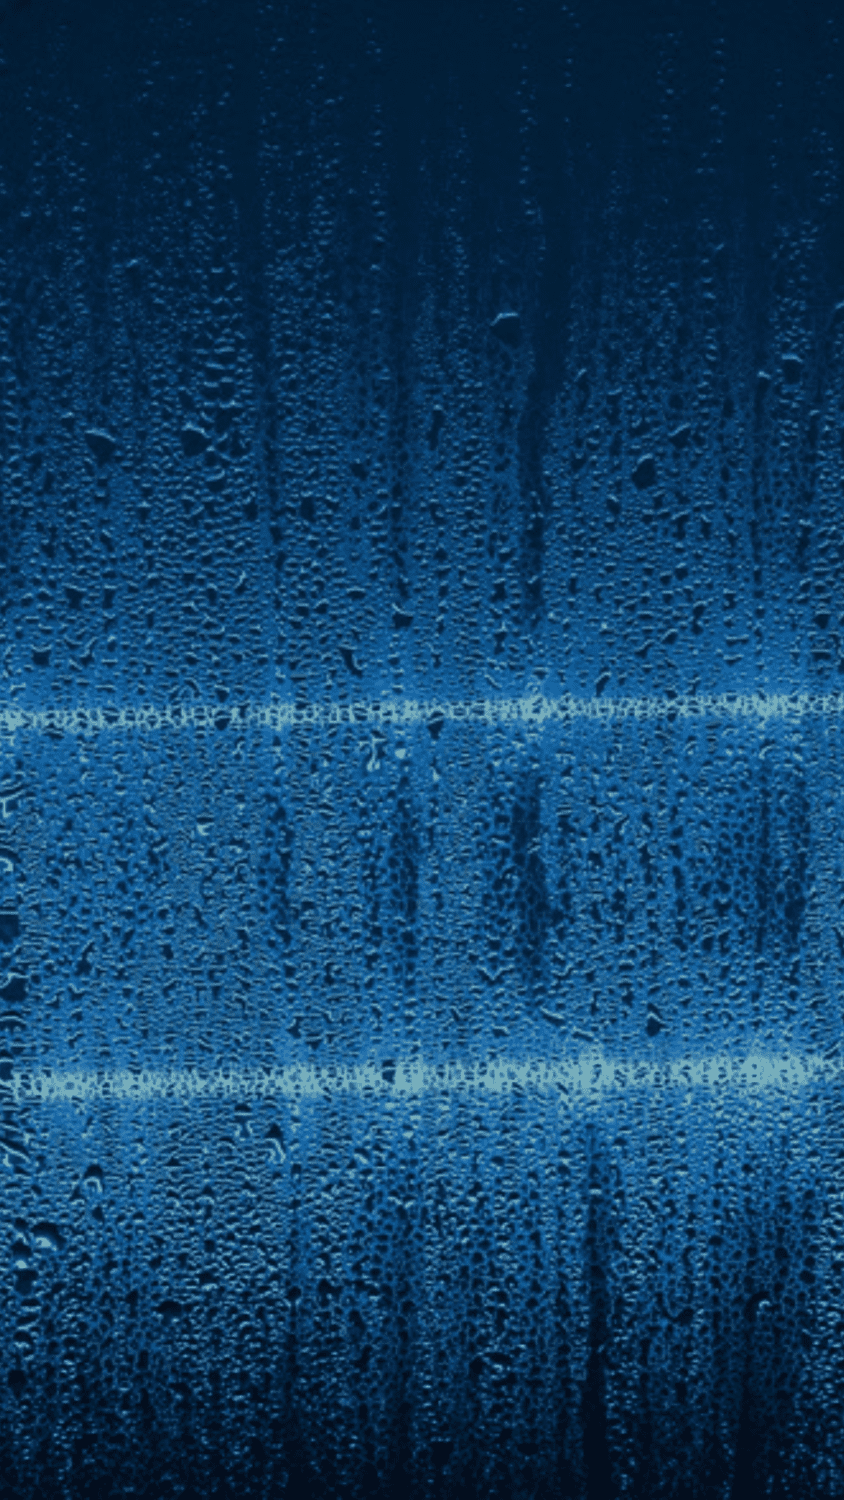 A close up of water droplets on a window, with a blue hue. - Blue